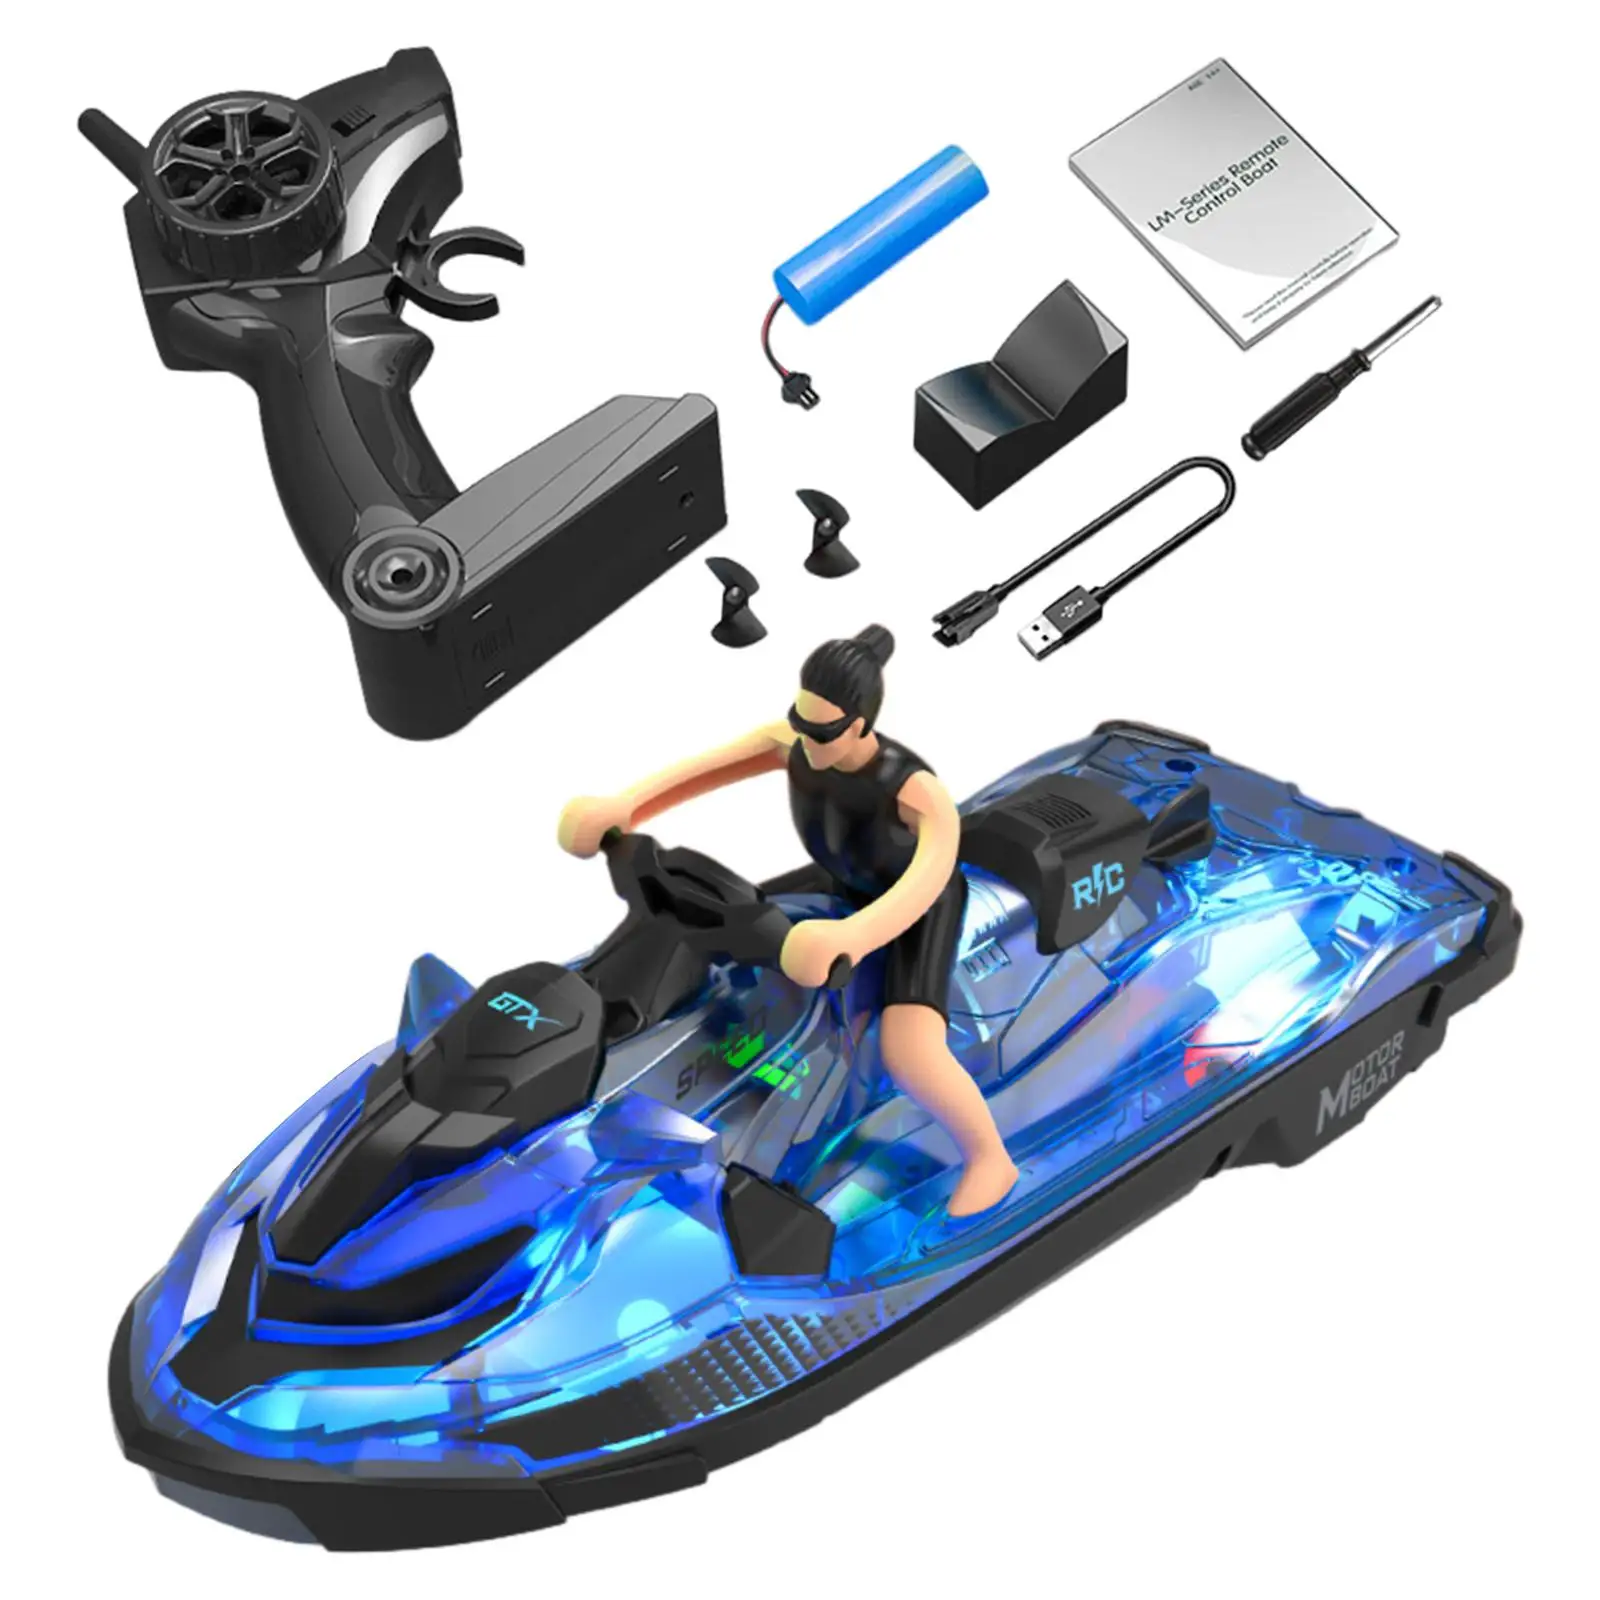 RC Boat Water Toy Pools and Lakes Waterproof Ship Toy with Light Remote Control Boat for Boys Kids Girls Adults Birthday Gifts